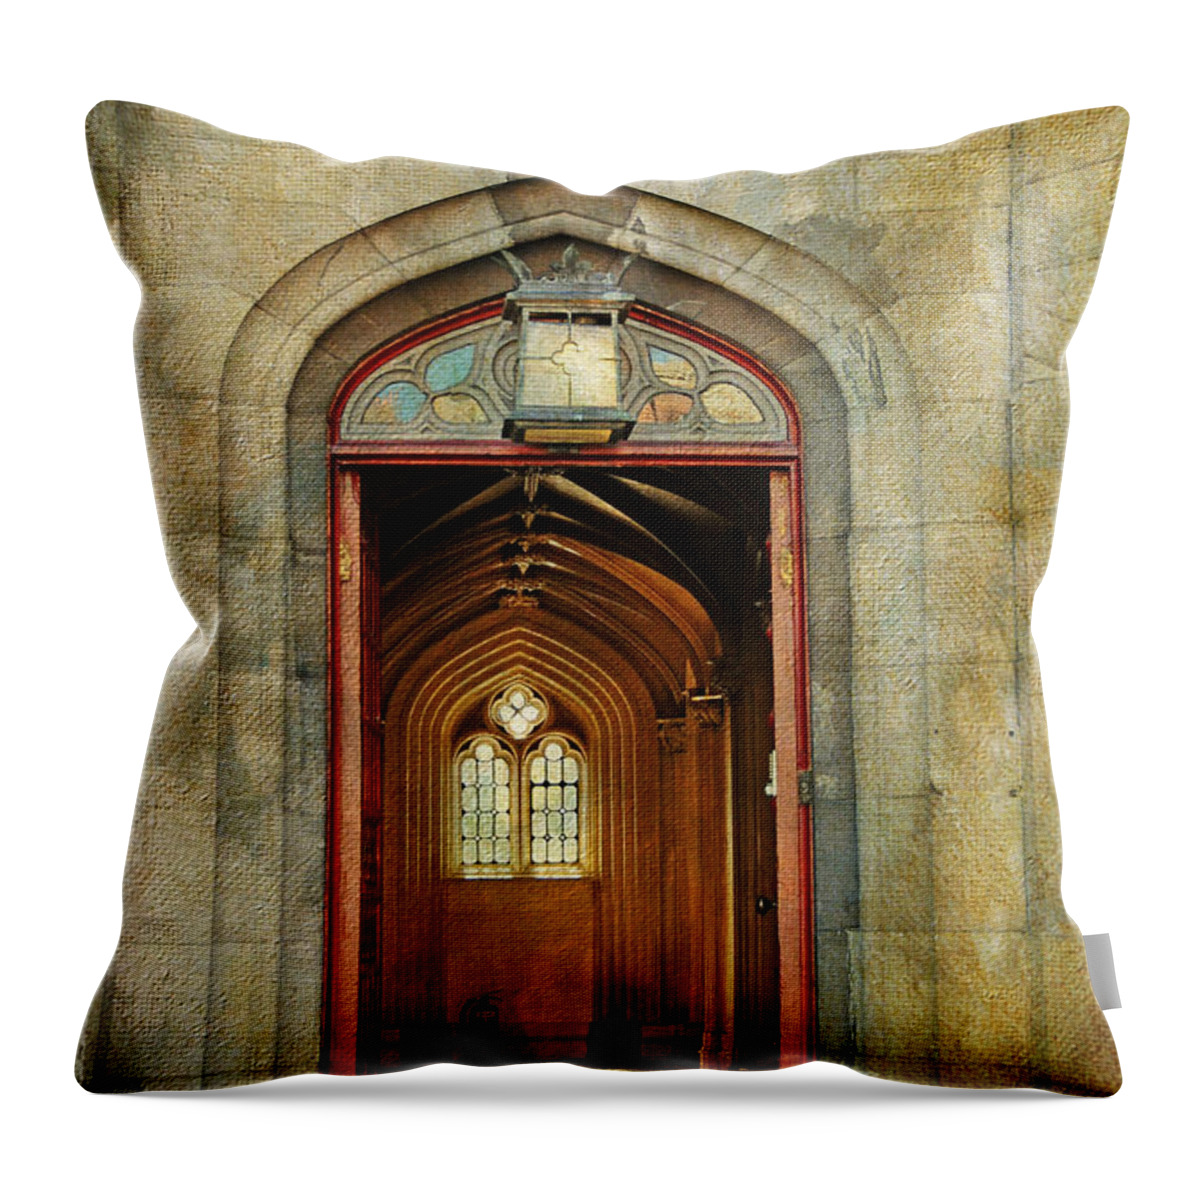 Ireland Throw Pillow featuring the photograph Entrance to the Gothic Revival Chapel. Streets of Dublin. Painting Collection by Jenny Rainbow